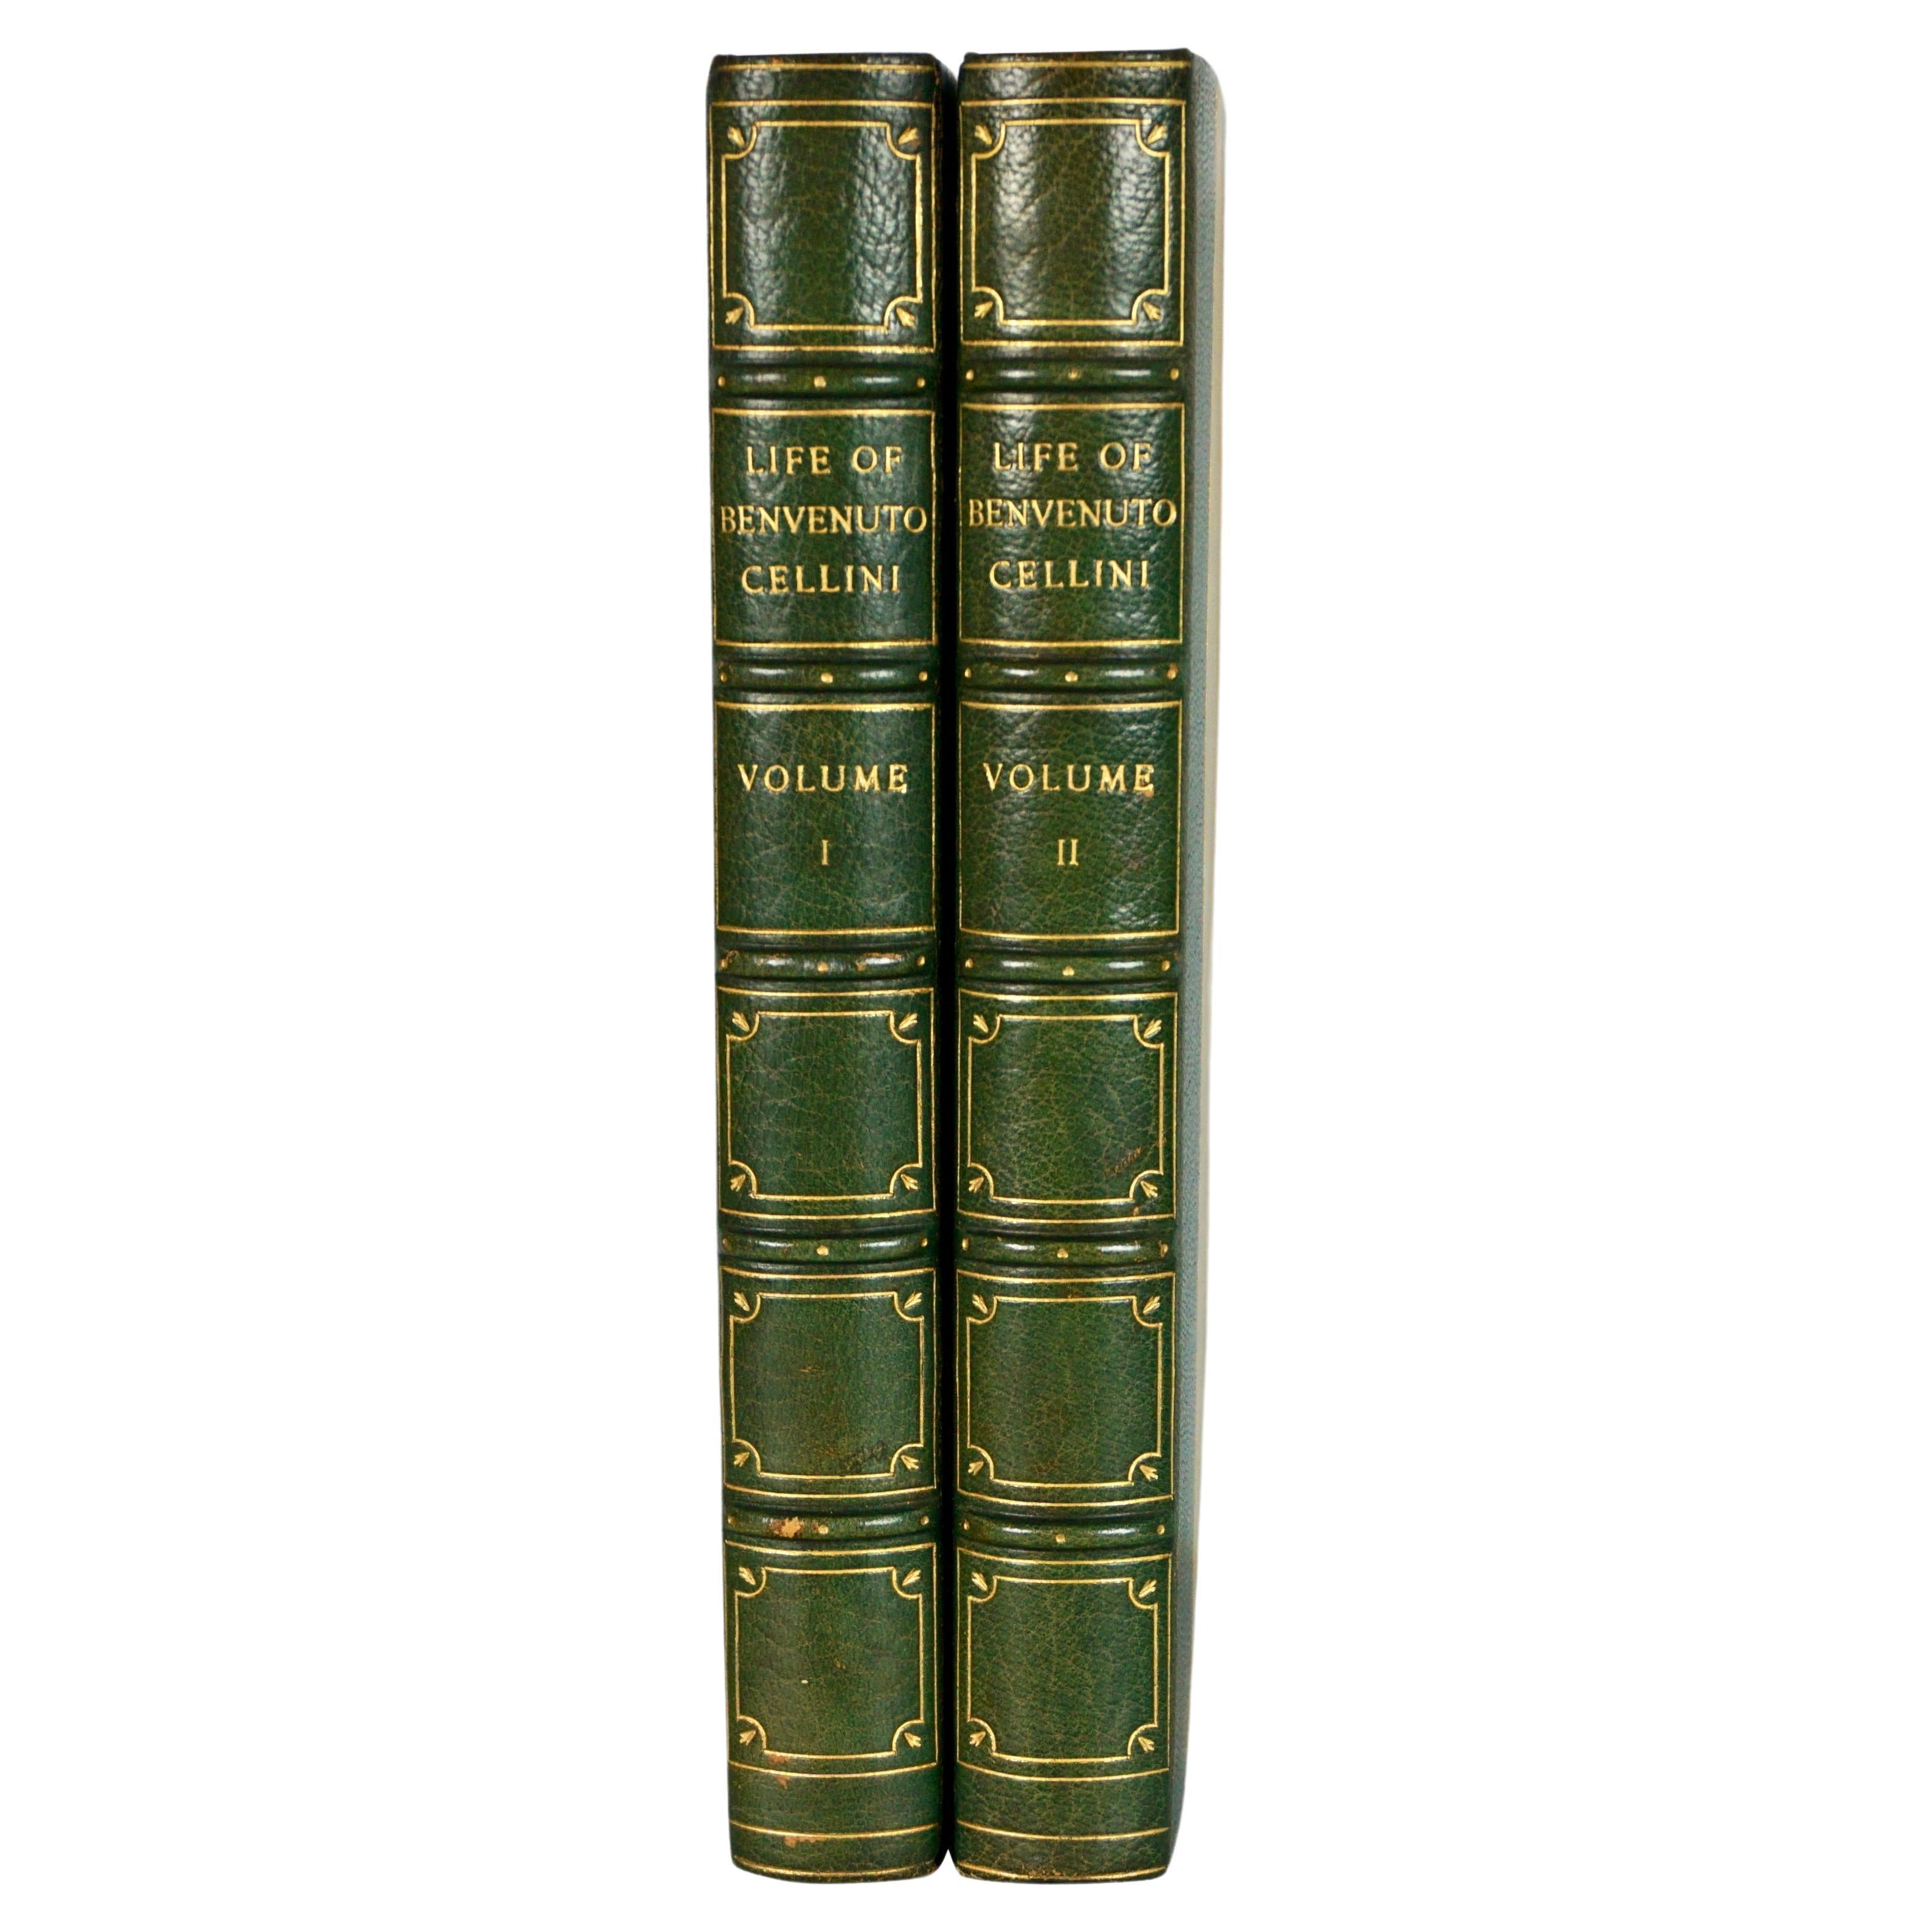 The Life of Benvenuto Cellini in 2 volumes. Published: 1906 by Brentanos. For Sale